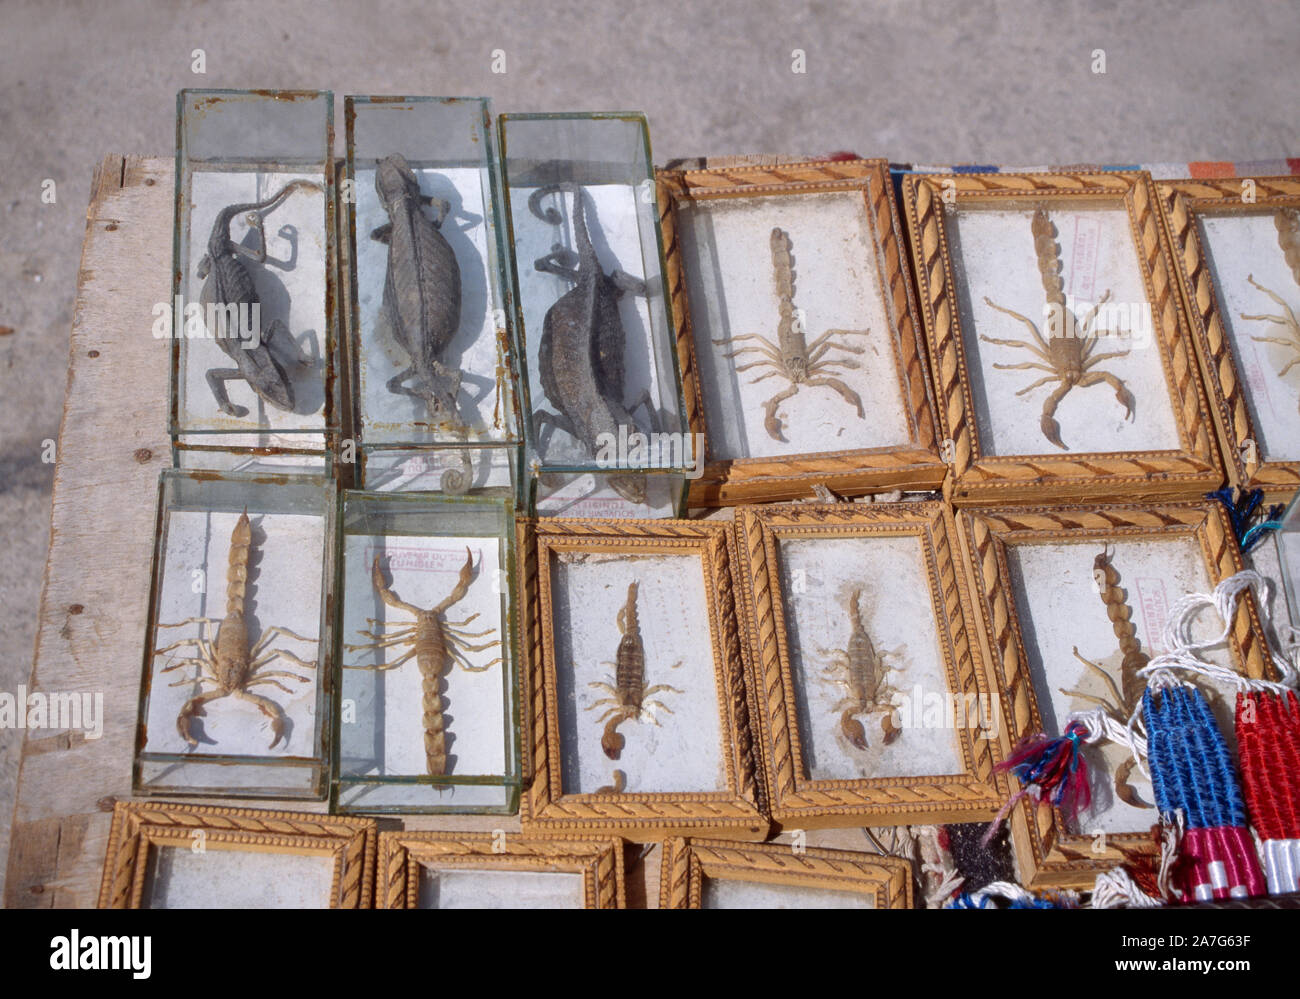 Framed, dead chameleons  and scorpions for sale in a market Medina, Tunisia. North Africa. Being sold as souvenirs to tourists. Stock Photo